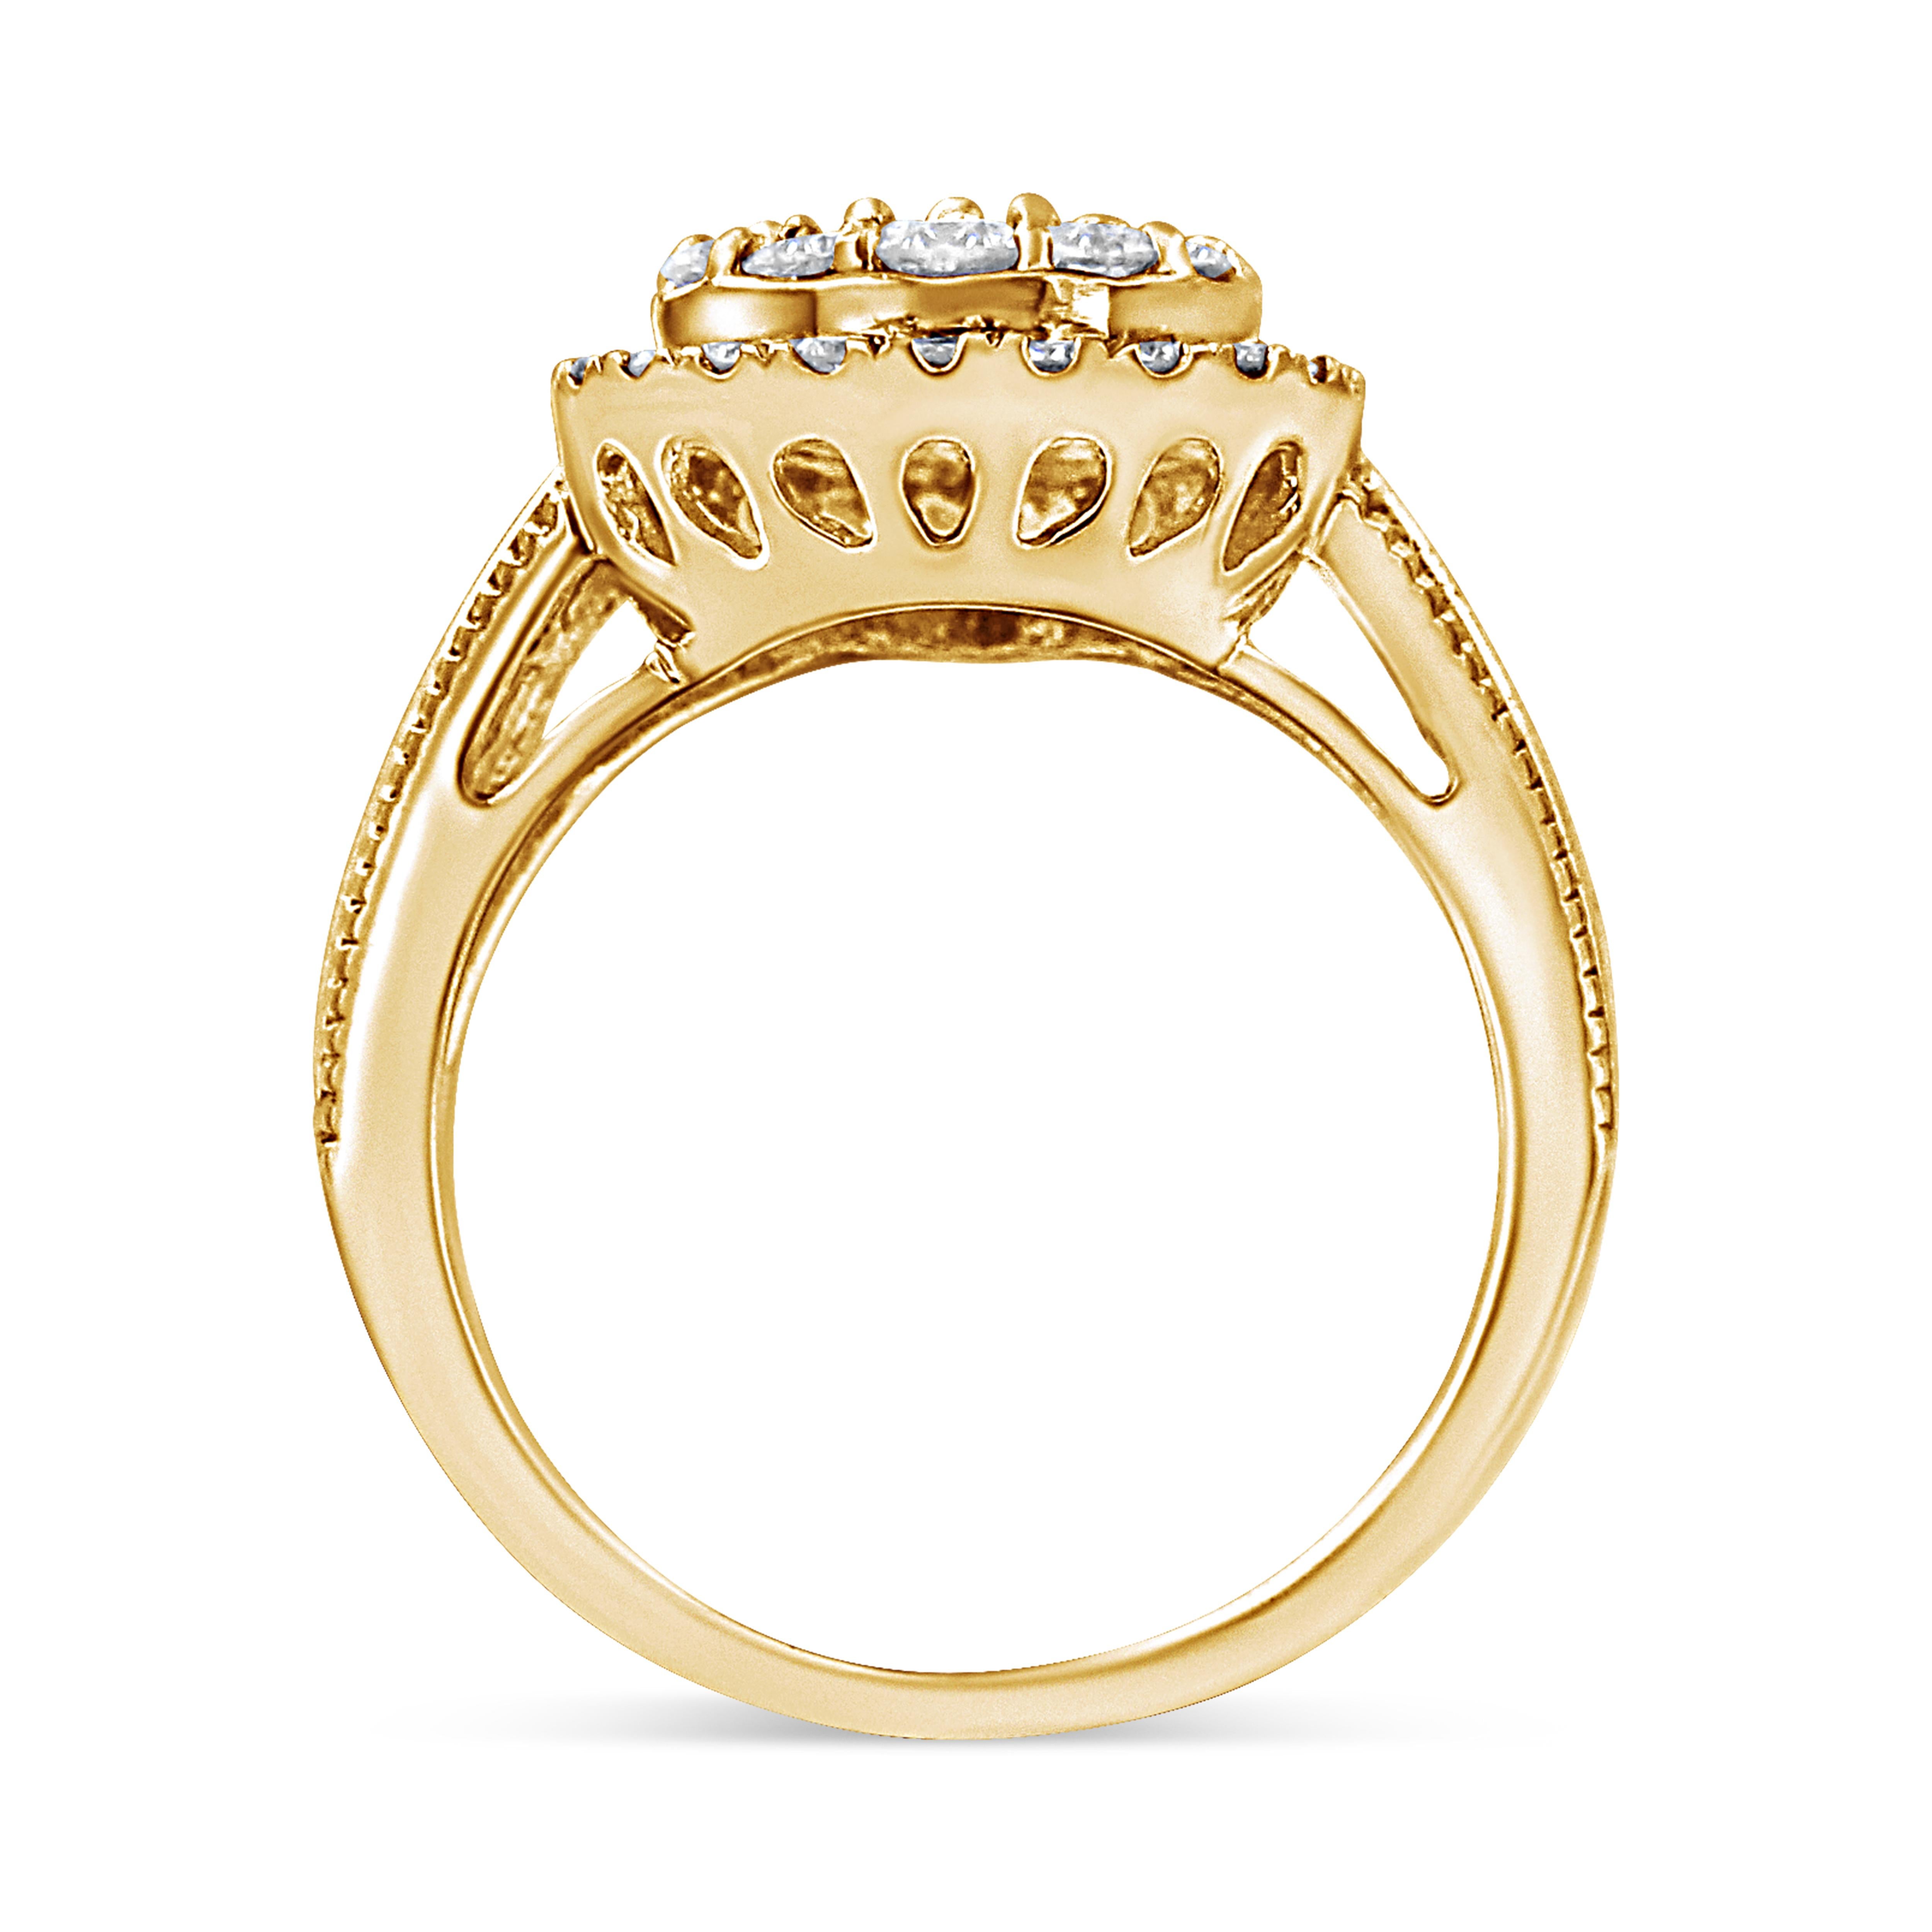 For Sale:  10K Yellow Gold over Silver 1 1/2 Carat Round-Cut Diamond Cocktail Ring 3